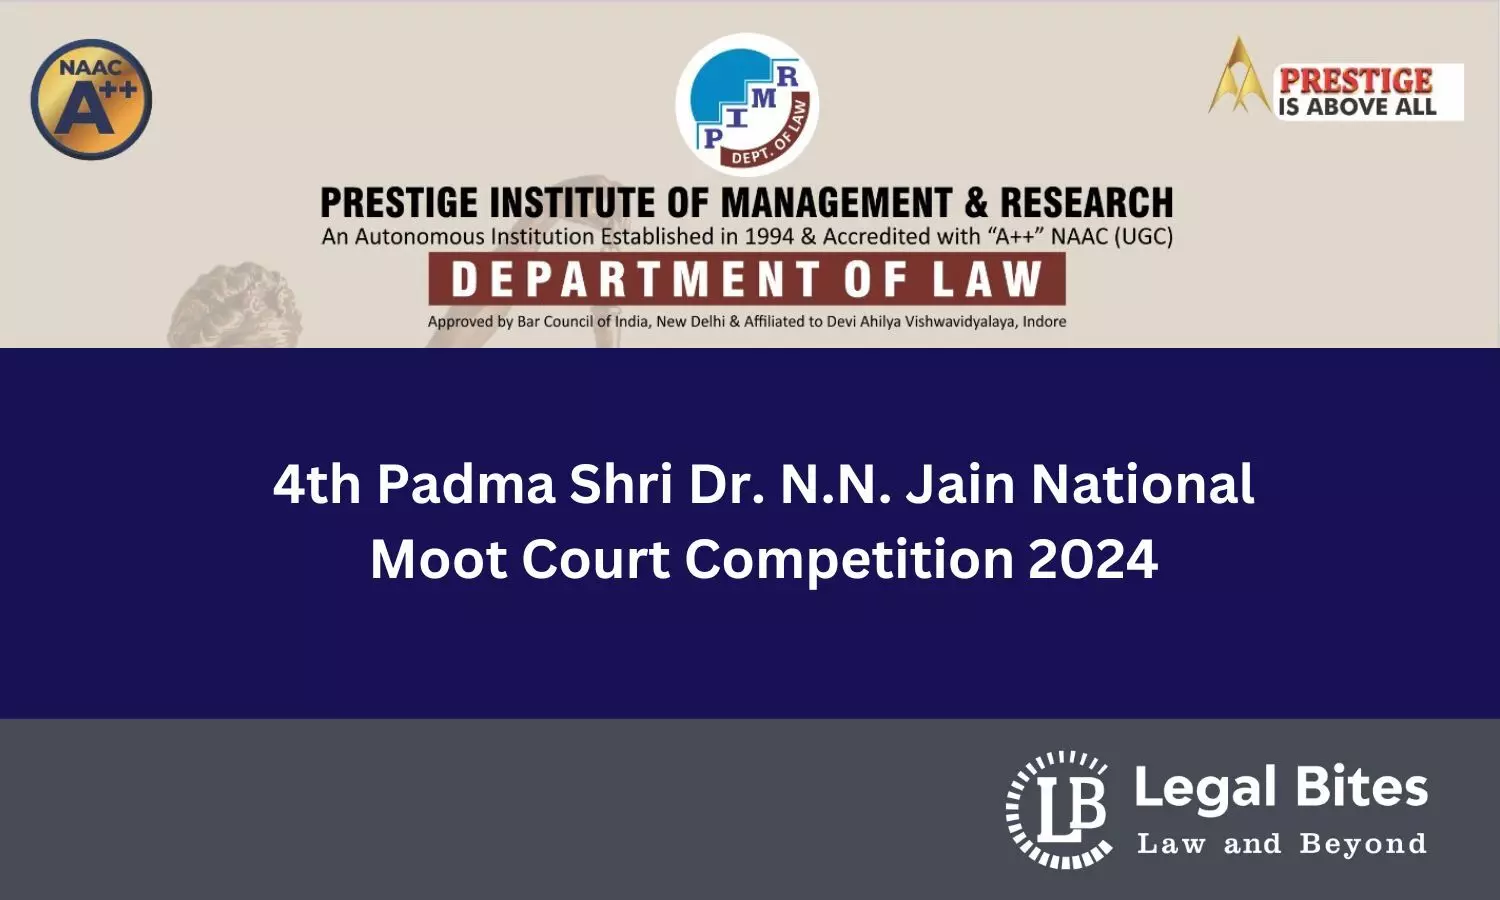 4th Padma Shri Dr. N.N. Jain National Moot Court Competition 2024 | Department of Law, Prestige Institute of Management and Research (Indore)